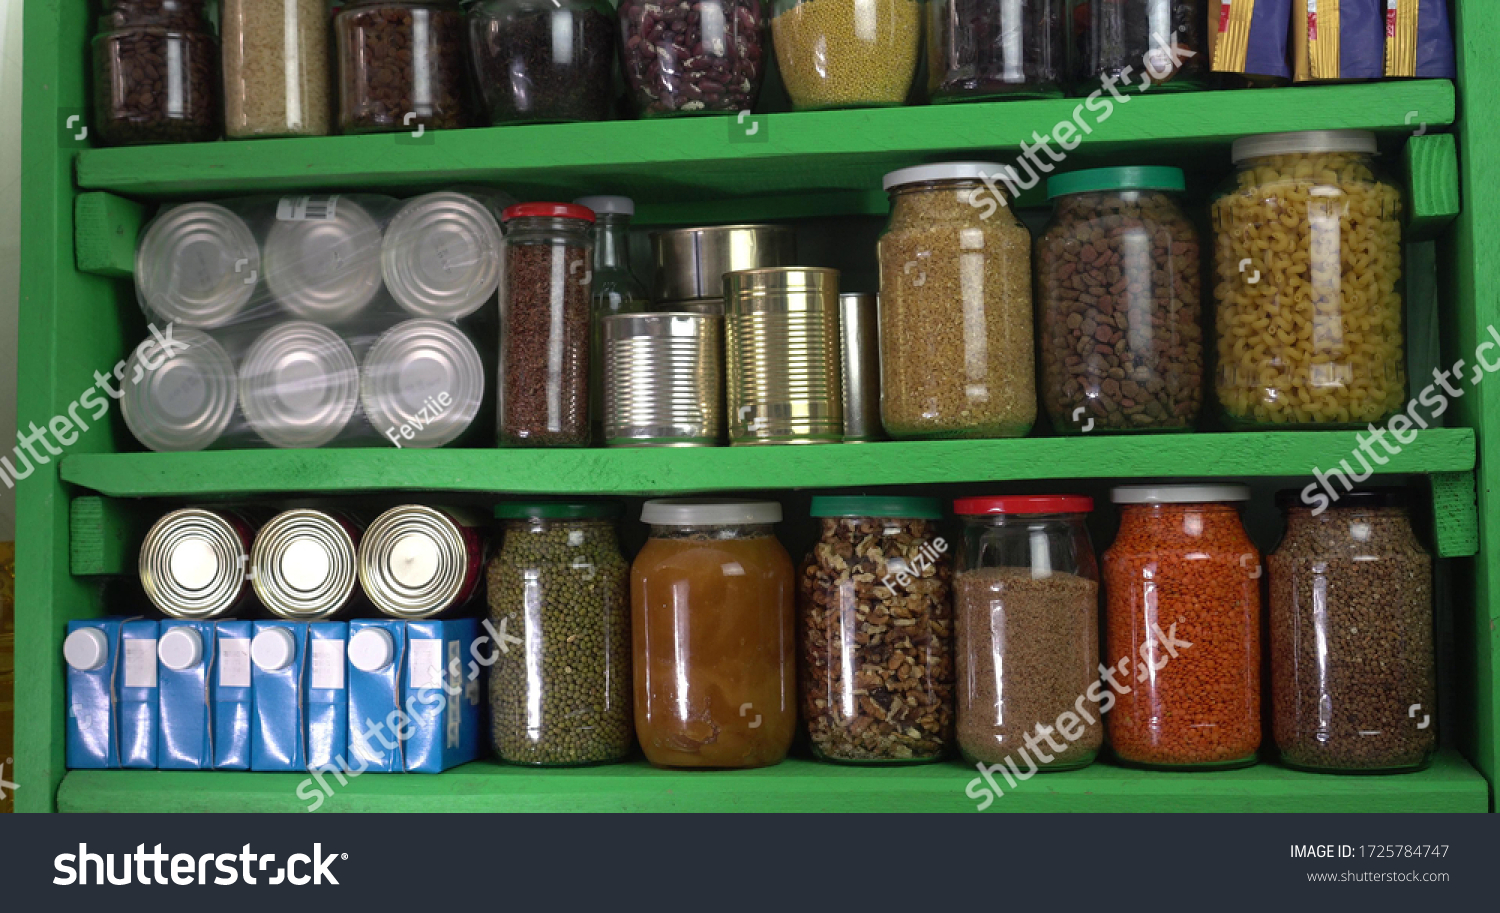 Buying food in bulk during the coronavirus lockdown period. Home pantry shelves with long-term storage and canned products #1725784747